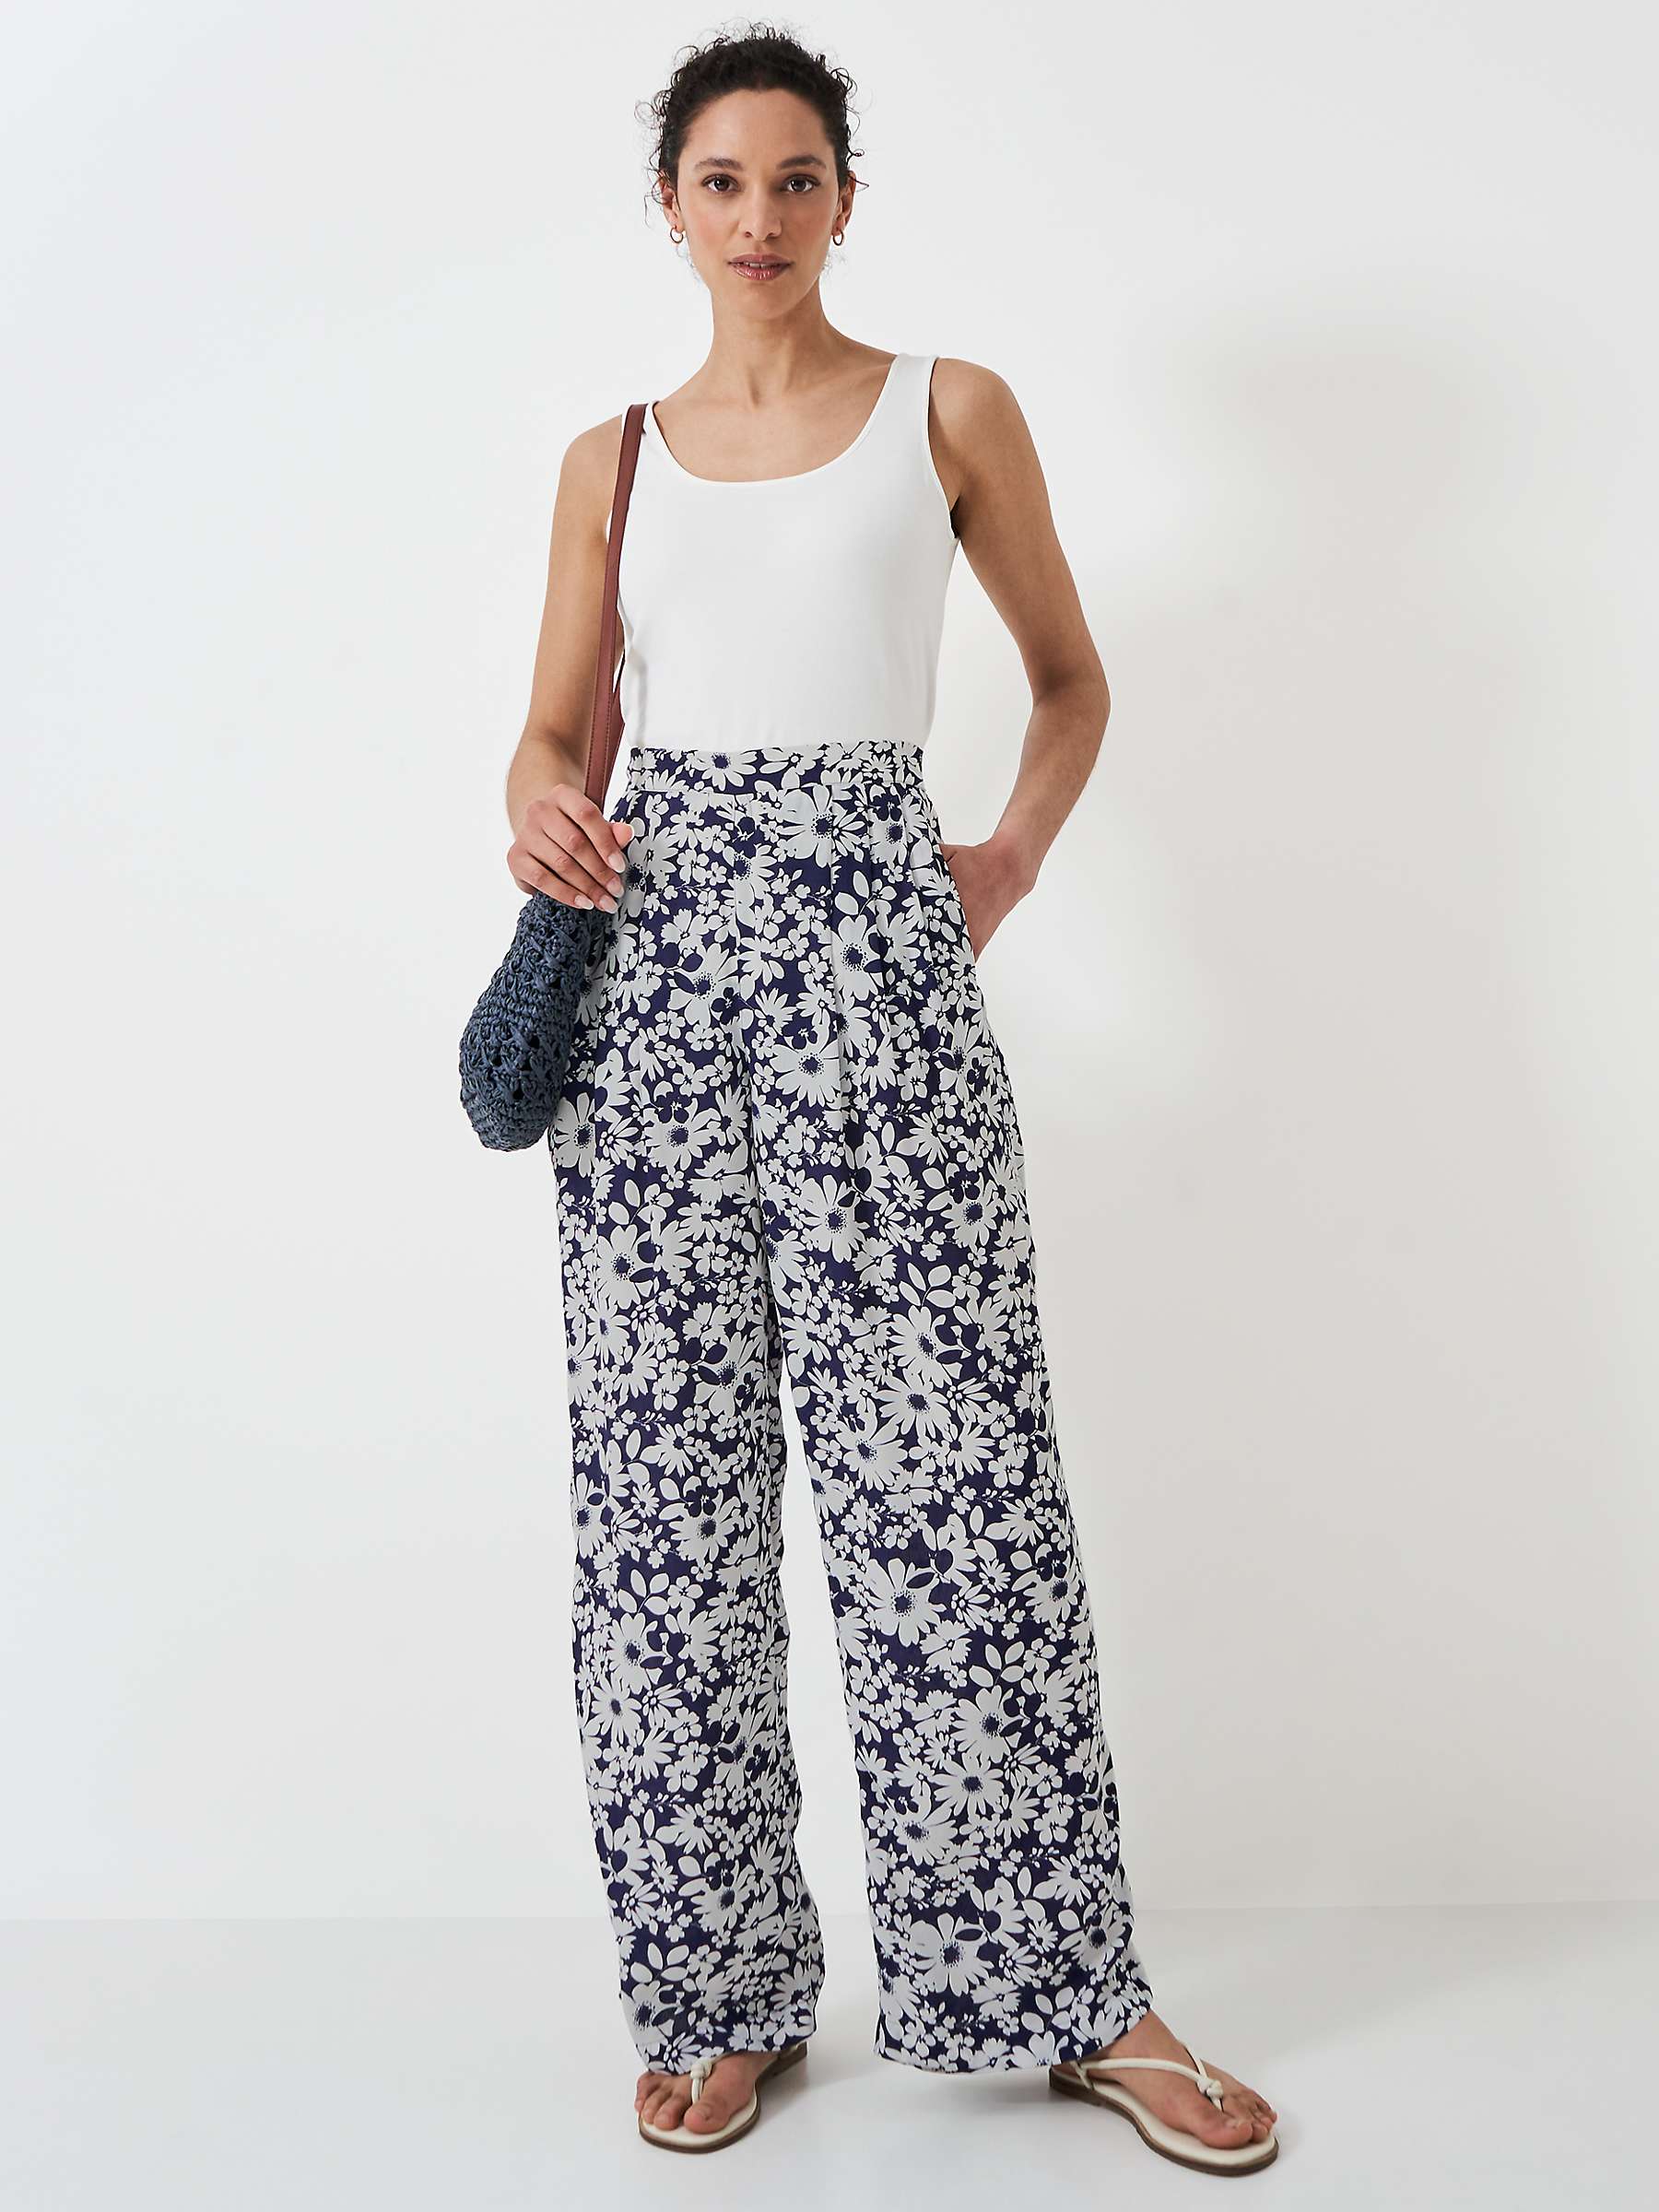 Buy Crew Clothing Dion Wide Leg Floral Print Trousers, Navy/White Online at johnlewis.com